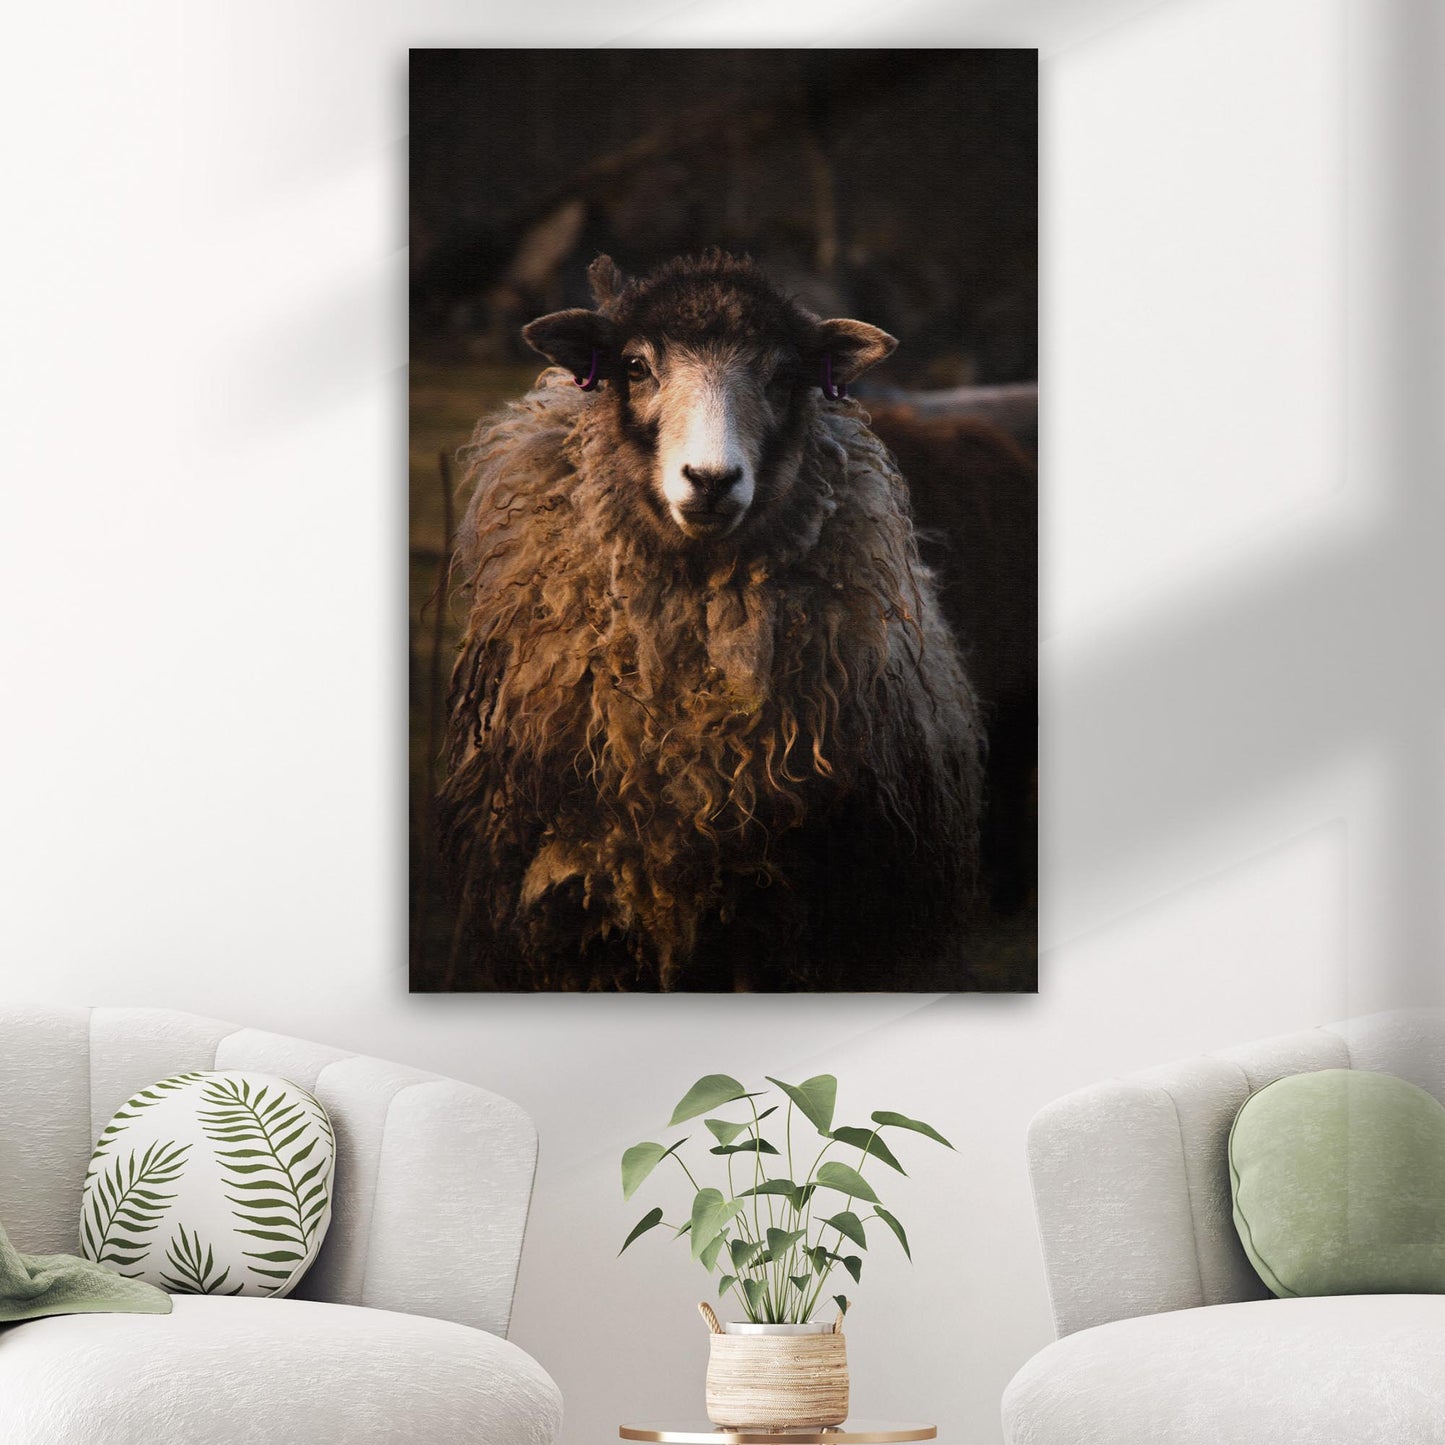 Sheep Stare Portrait Canvas Wall Art - Image by Tailored Canvases